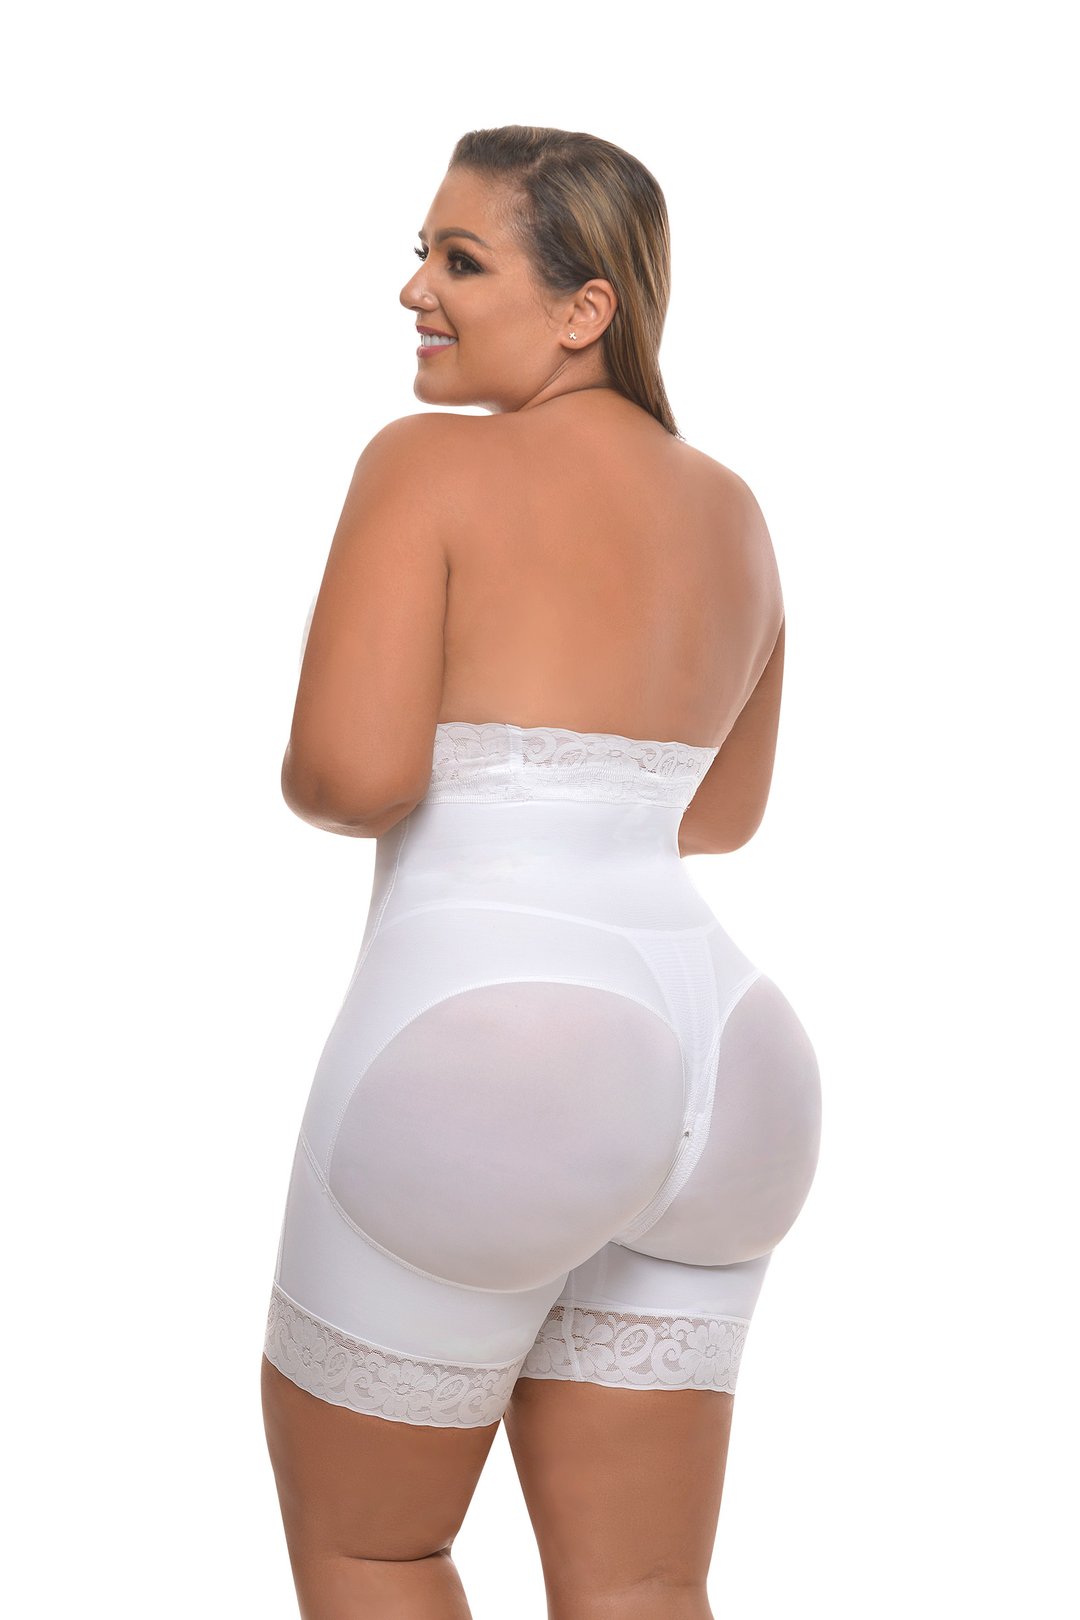 Jackie London Hip And Gluteus Enhancer Panty JL4001 - Made In Colombia -  XS-6XL